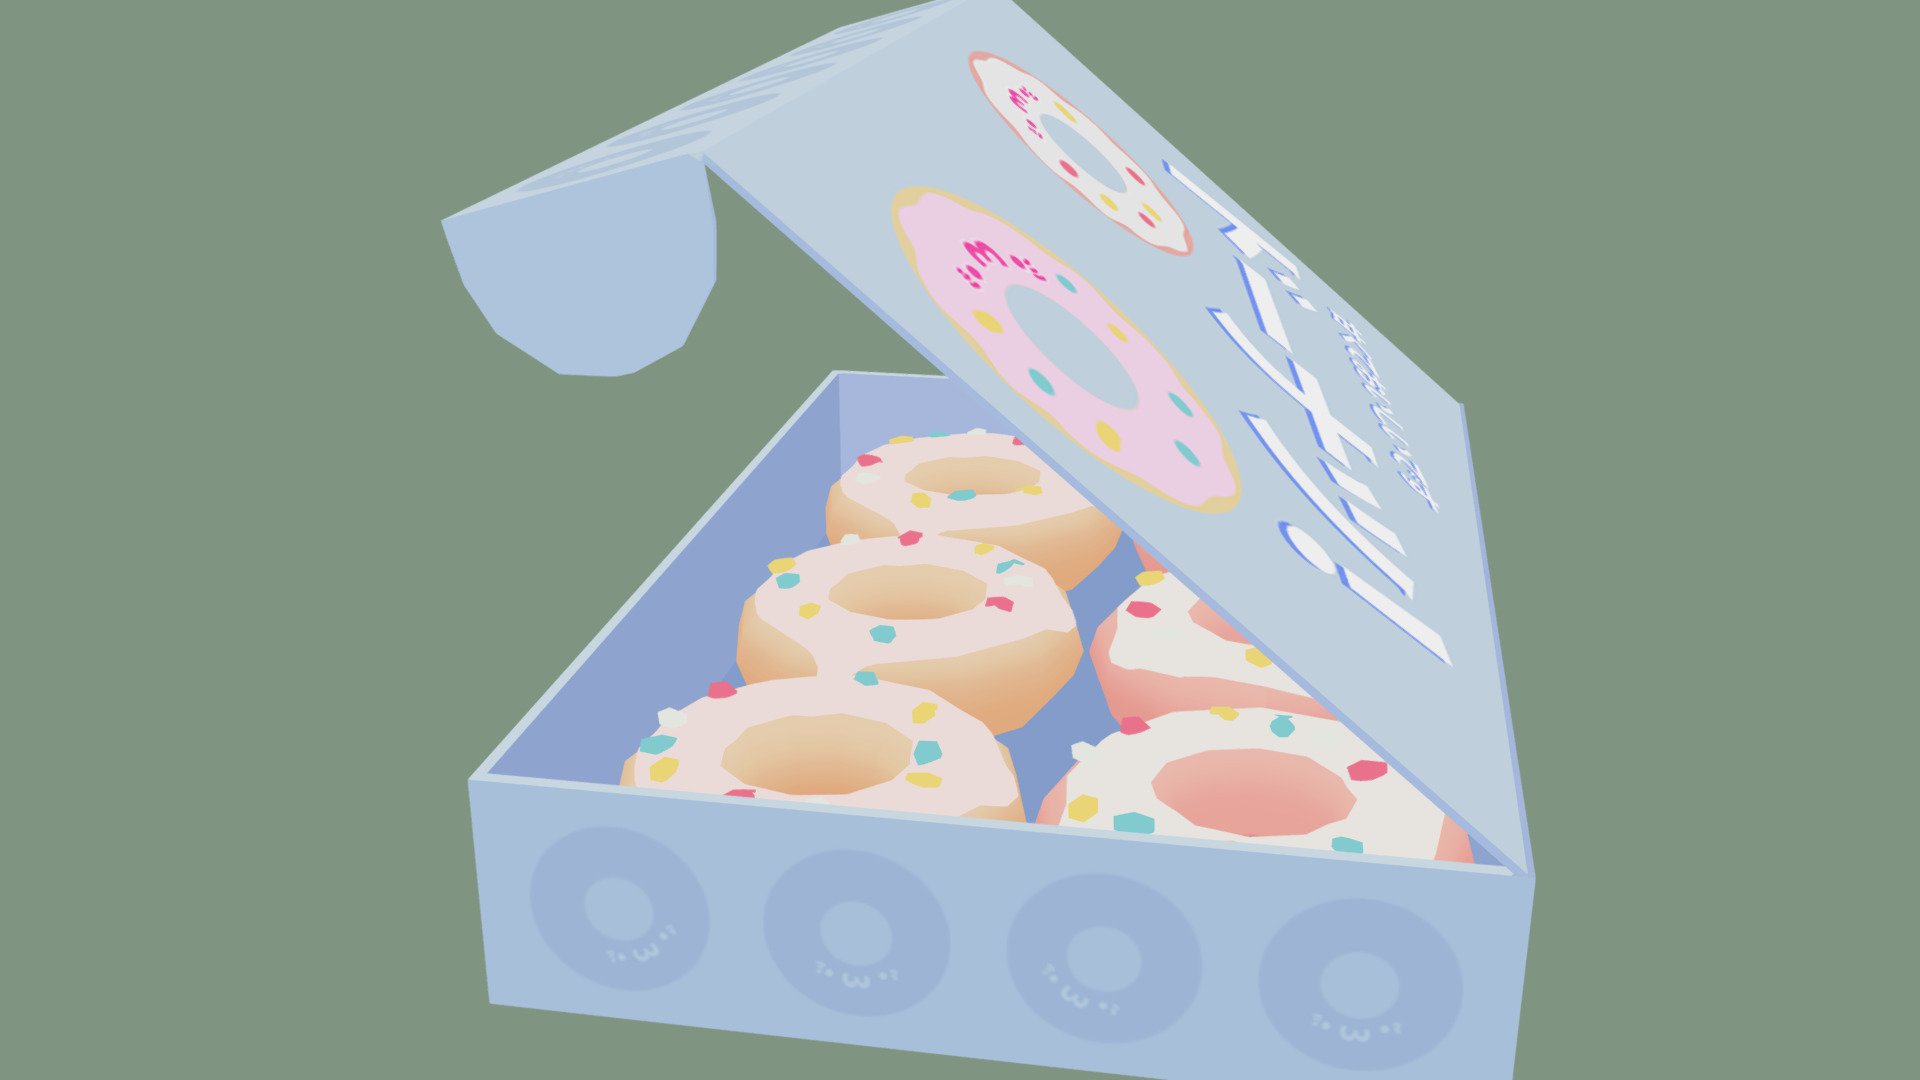 A box of donuts. I went for a cute Japanese aesthetic.
Translations: Top: &ldquo;Delicious and sweet
Donuts